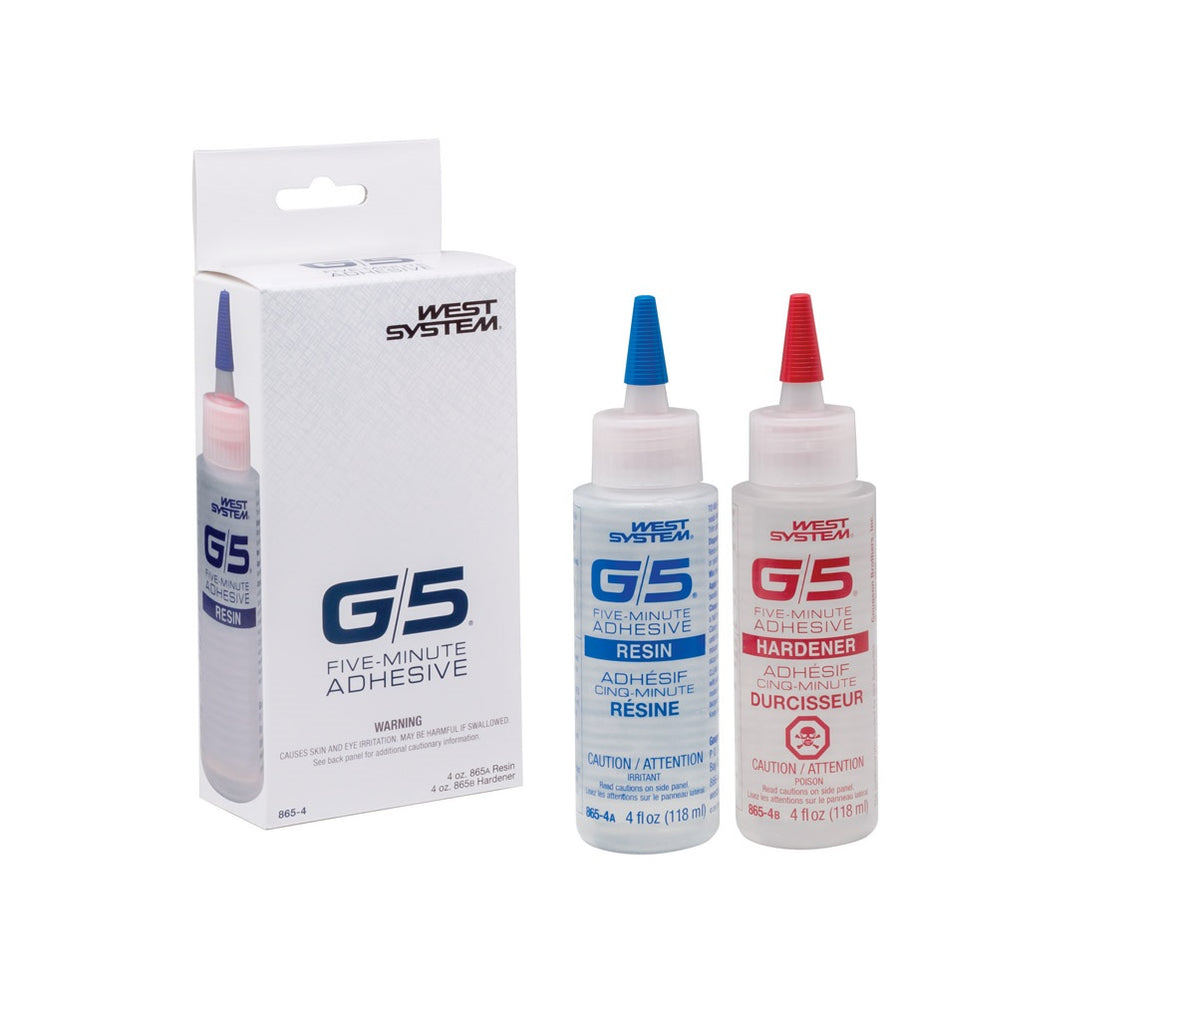 West System 865-4 G/5 Five-Minute Adhesive Kit, Clear, 2 Count